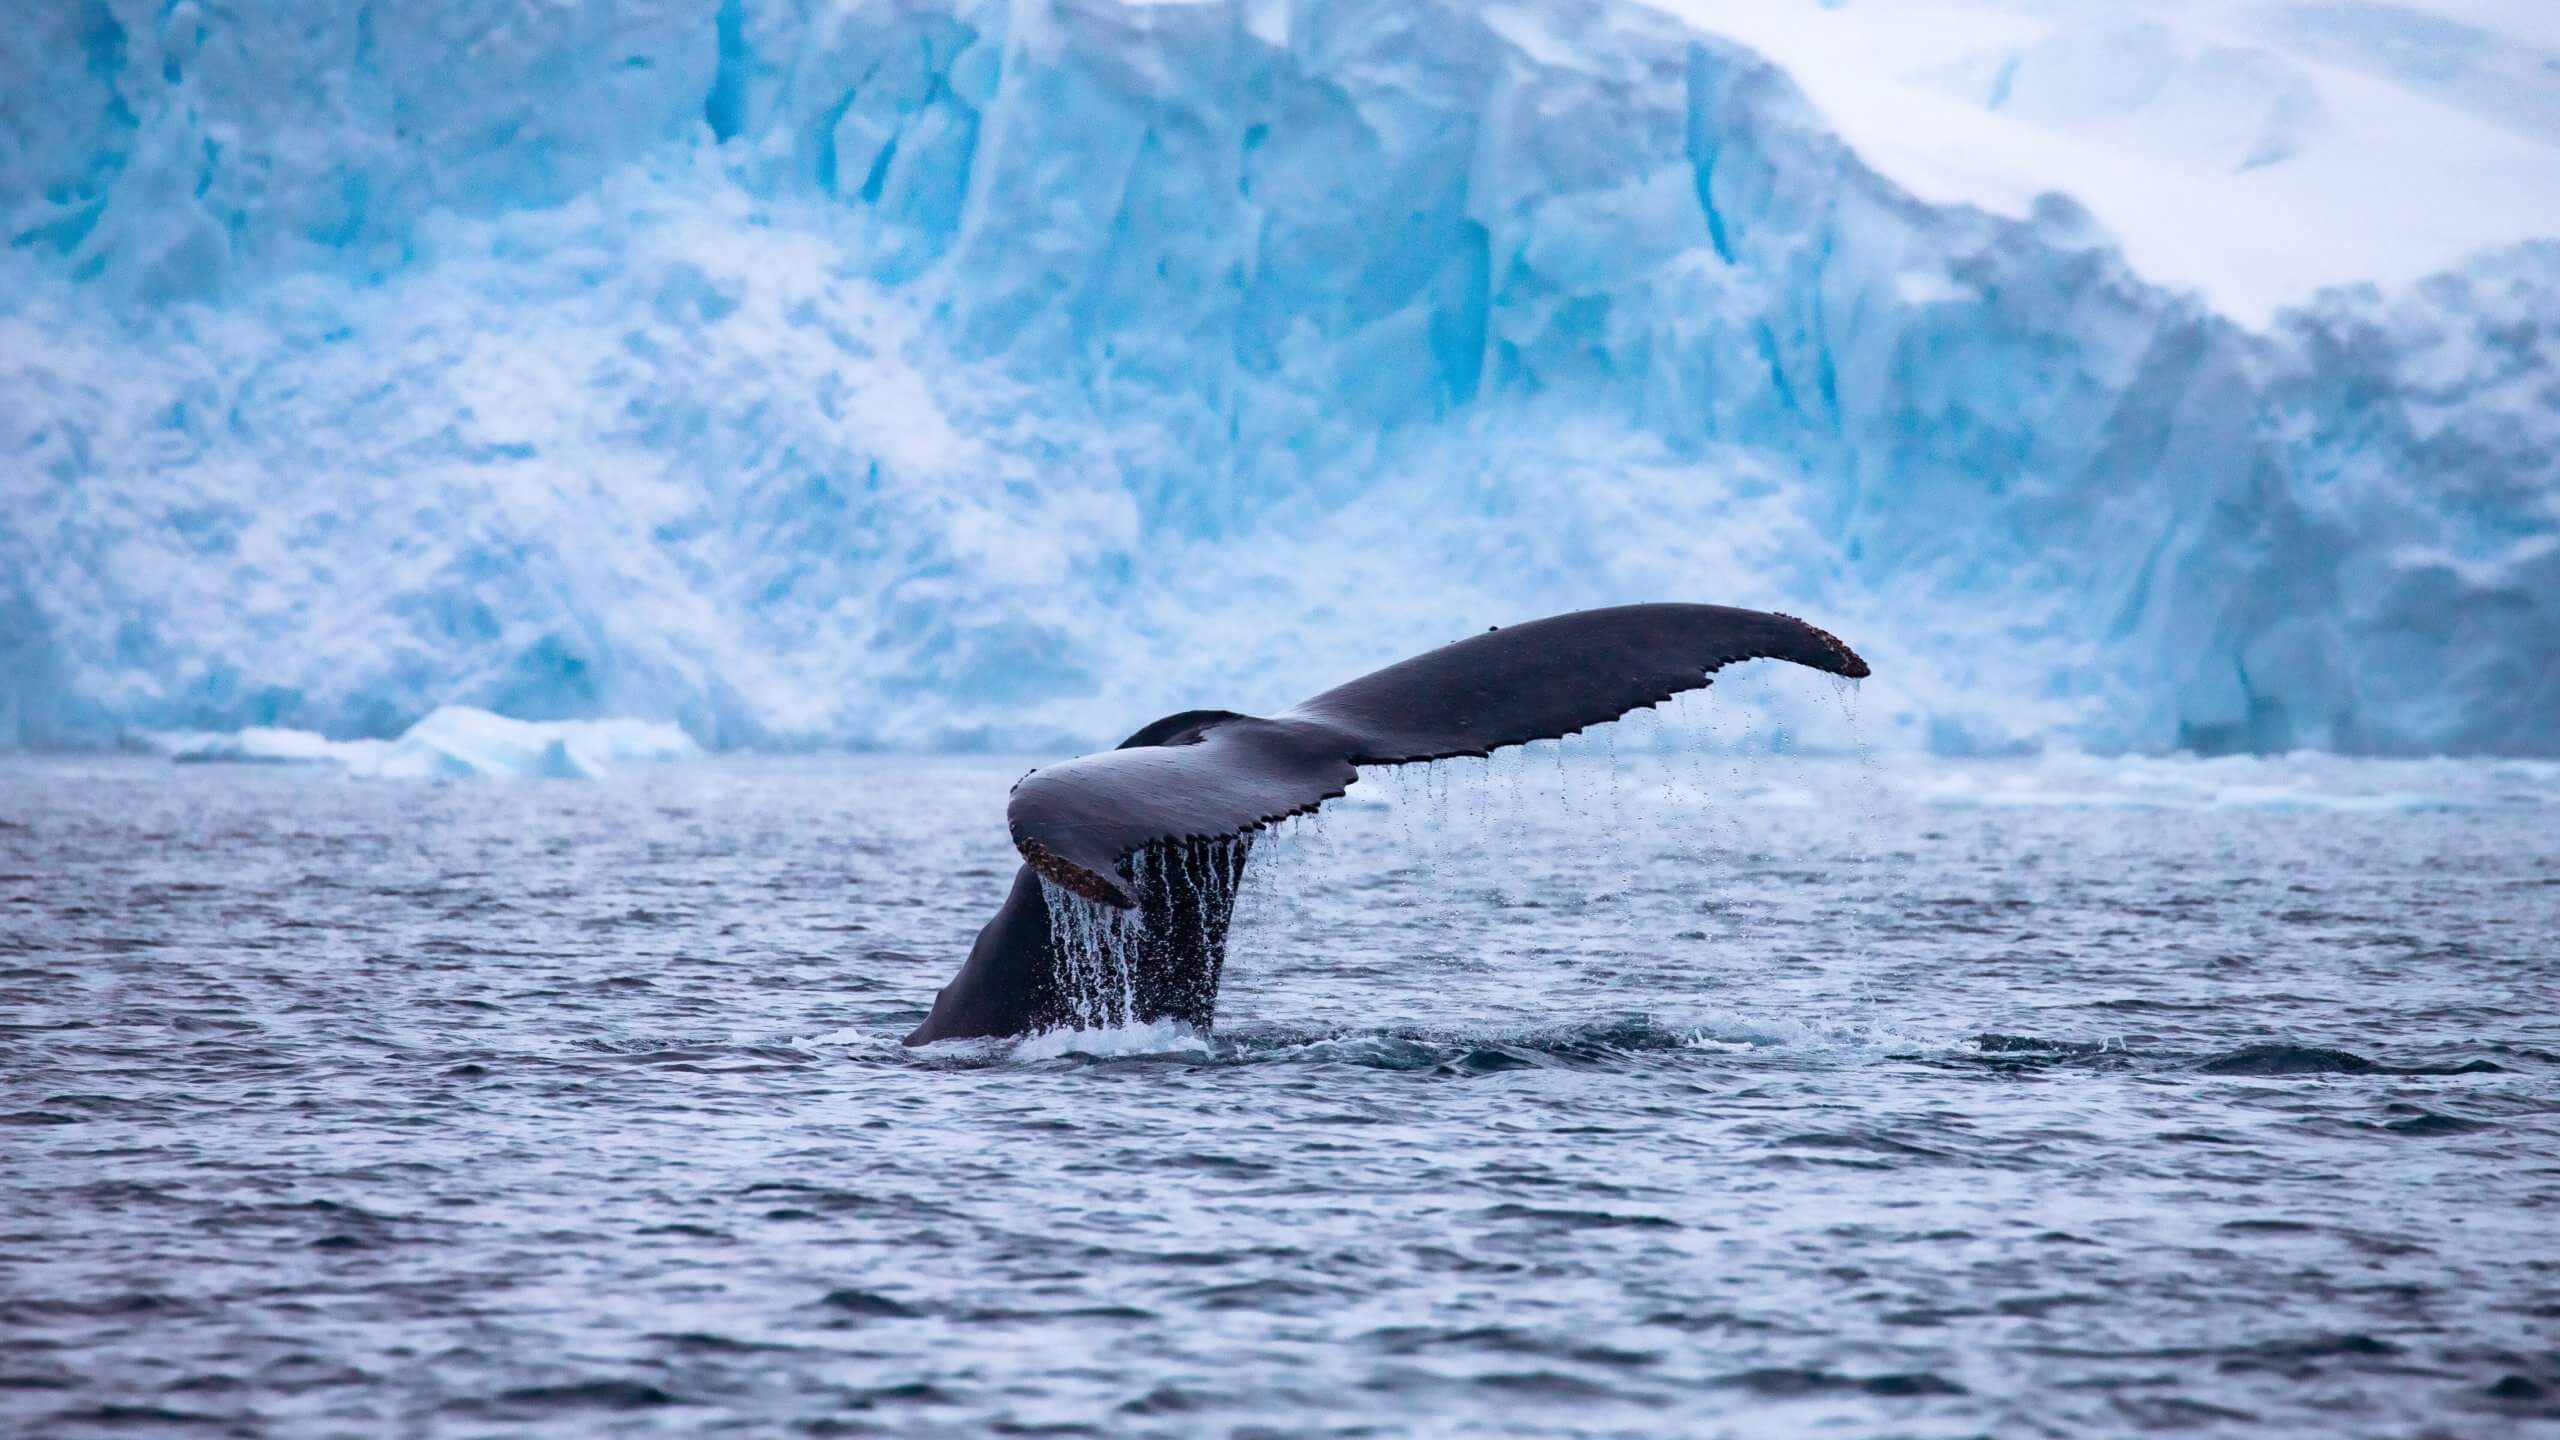 A new study illustrates the enormous contribution of whales, which may help us in the fight against the climate crisis. Photo by Lee Kelai on Unsplash